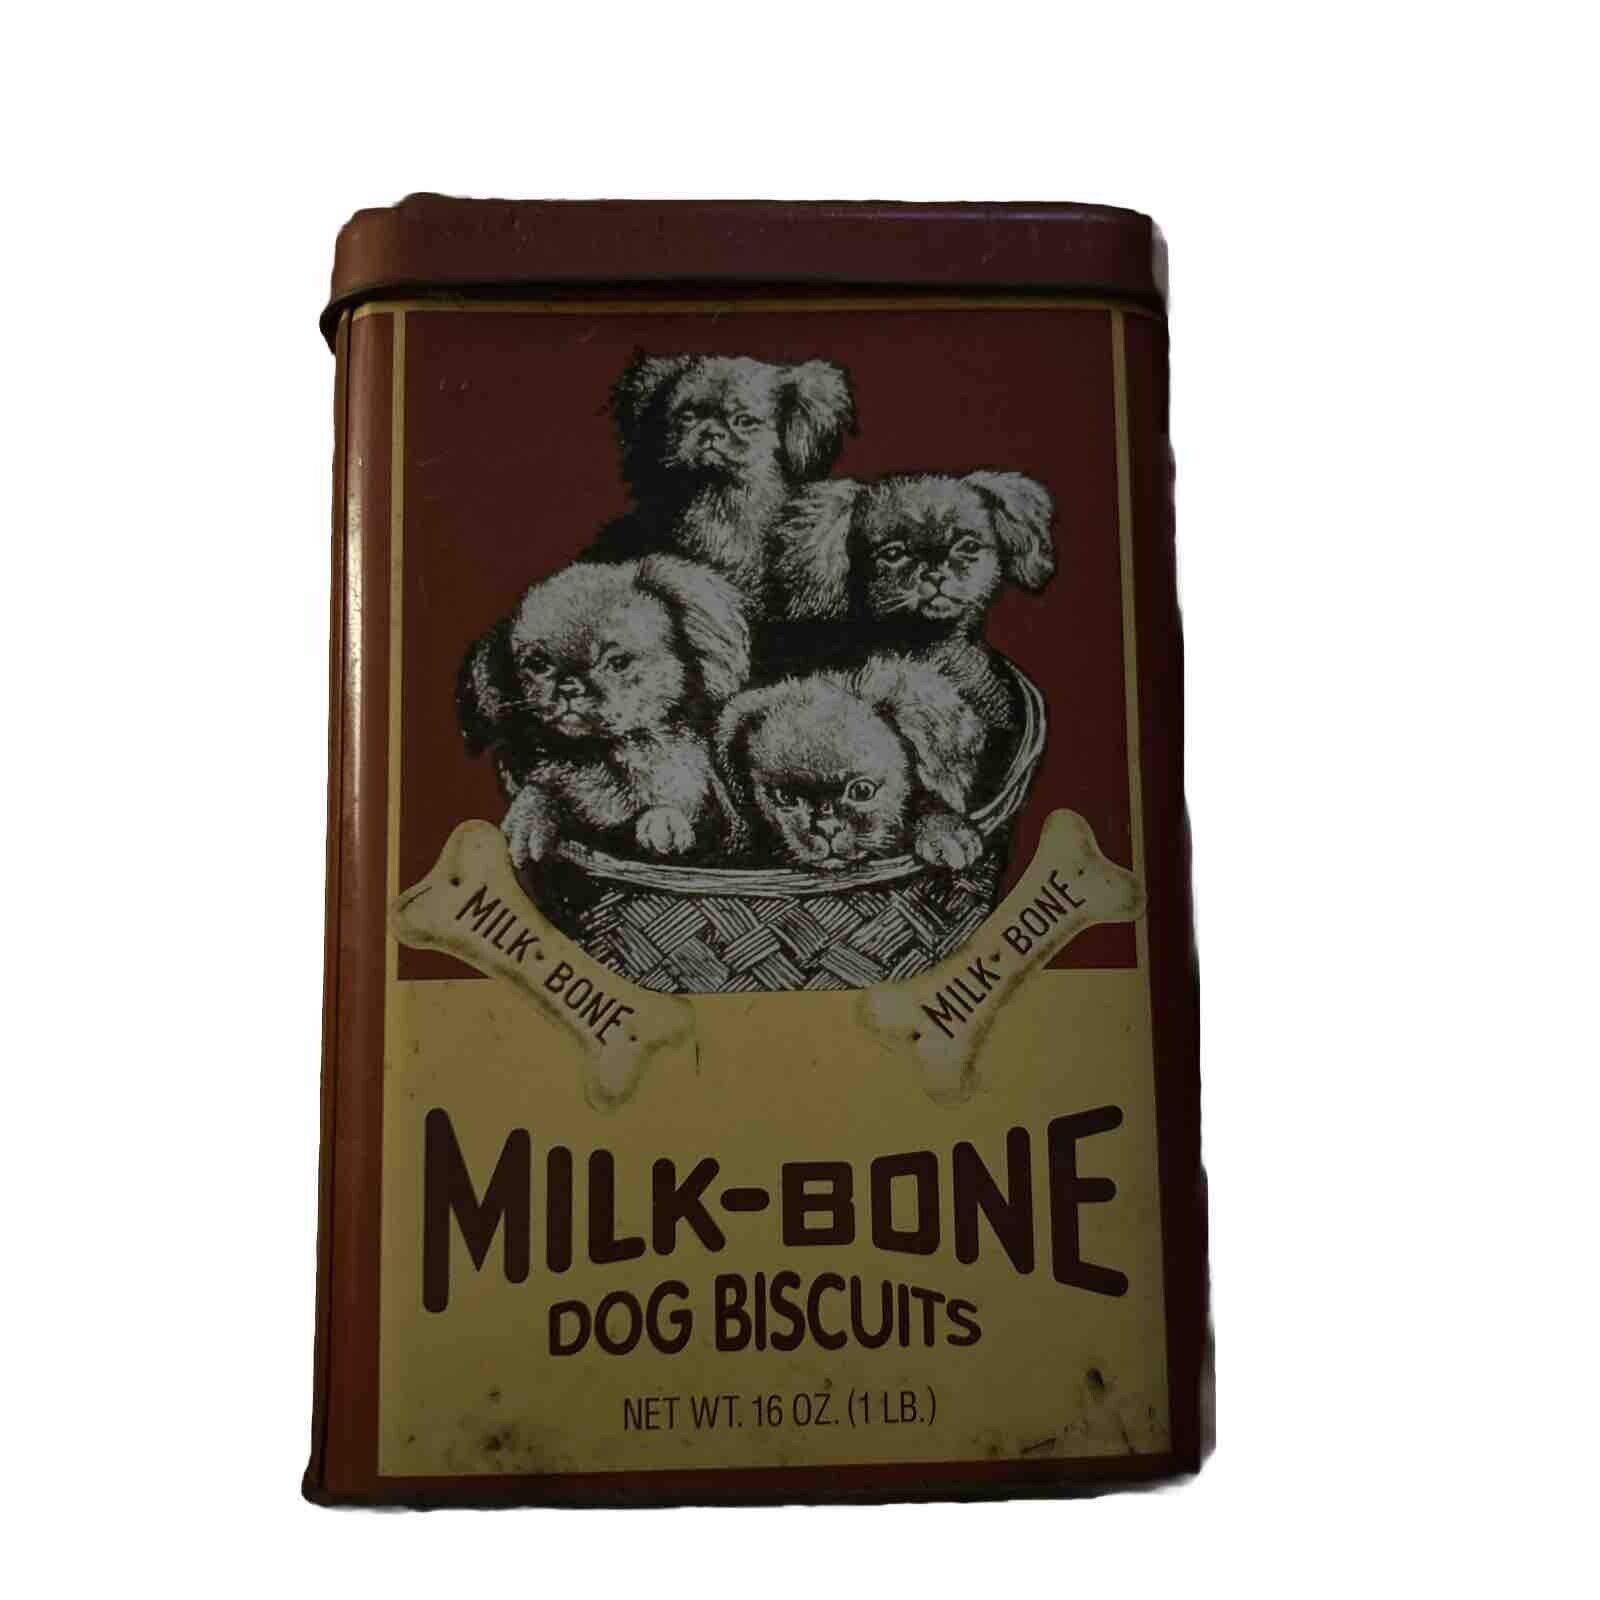 Vintage Pekingese/ Toy Breed Milk Bone Dog Biscuits Tin Container/ Collectible